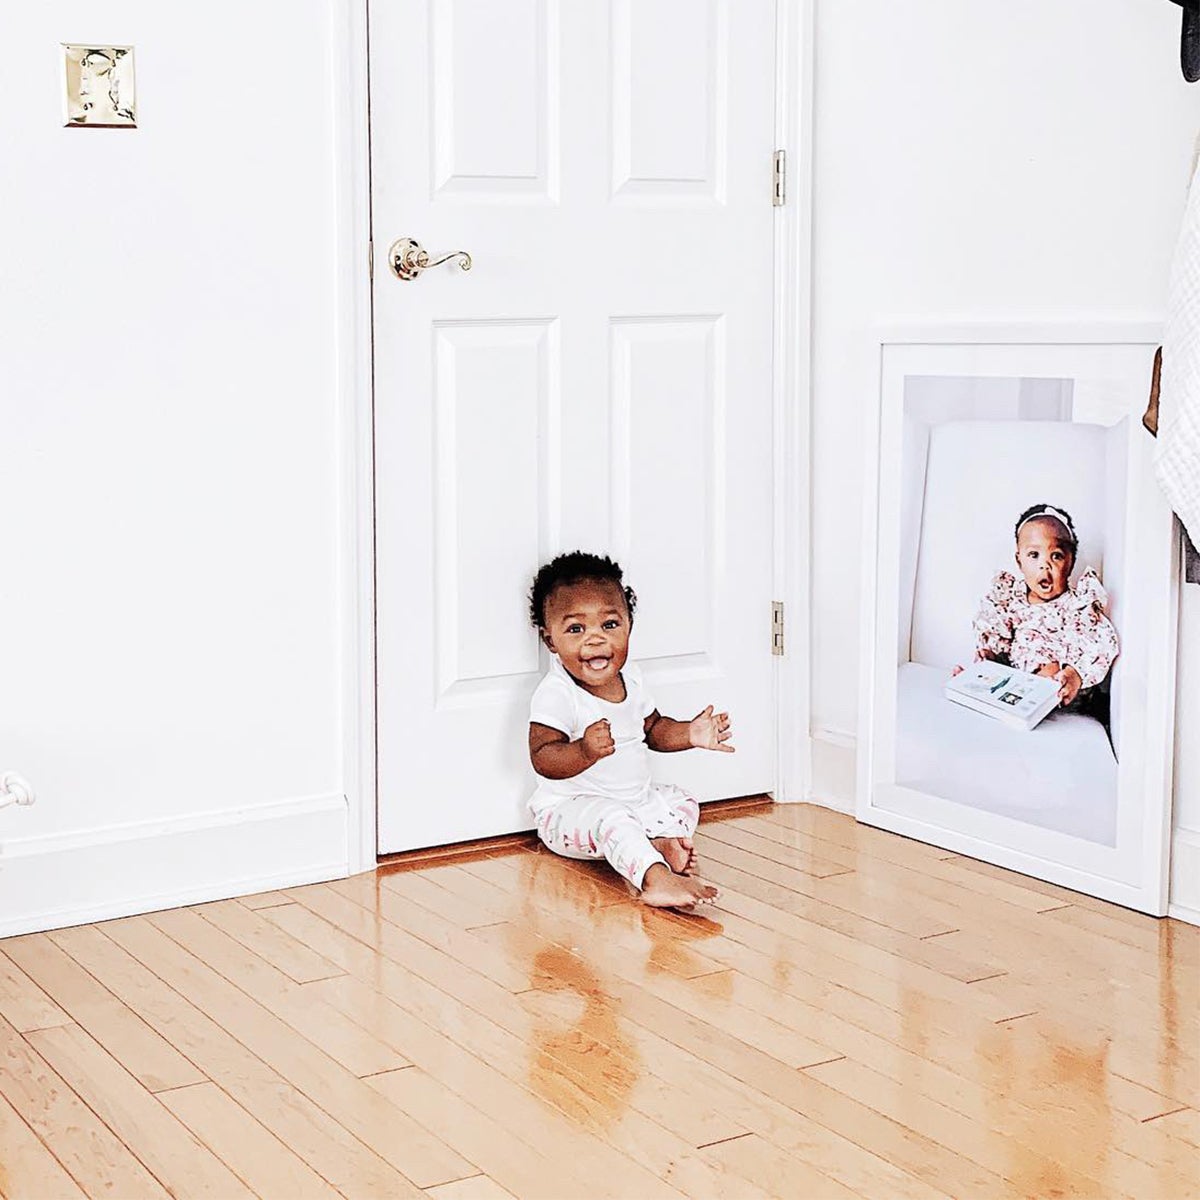 Baby sitting in front of enlarge photo of self resting on ground